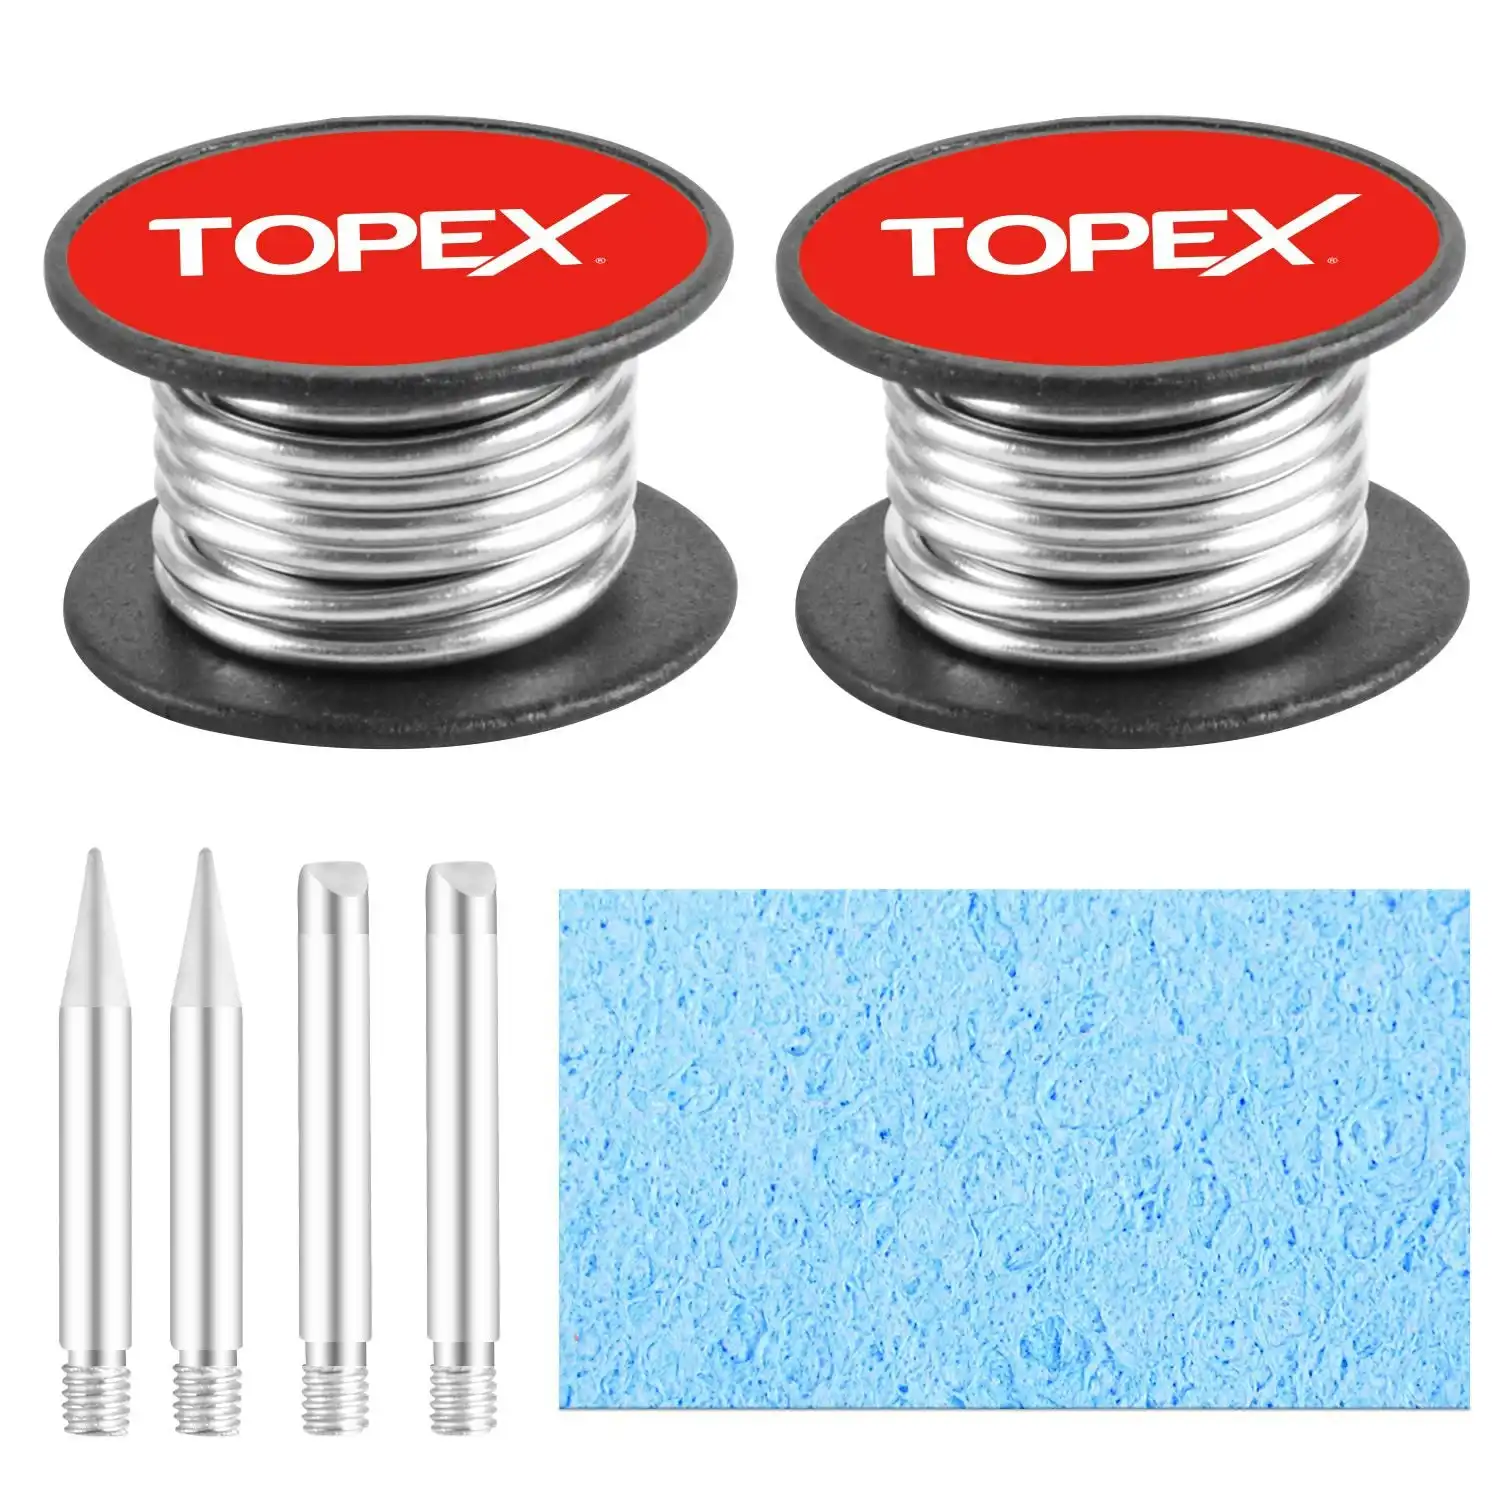 Topex TX068 Replacement Soldering Iron Tips